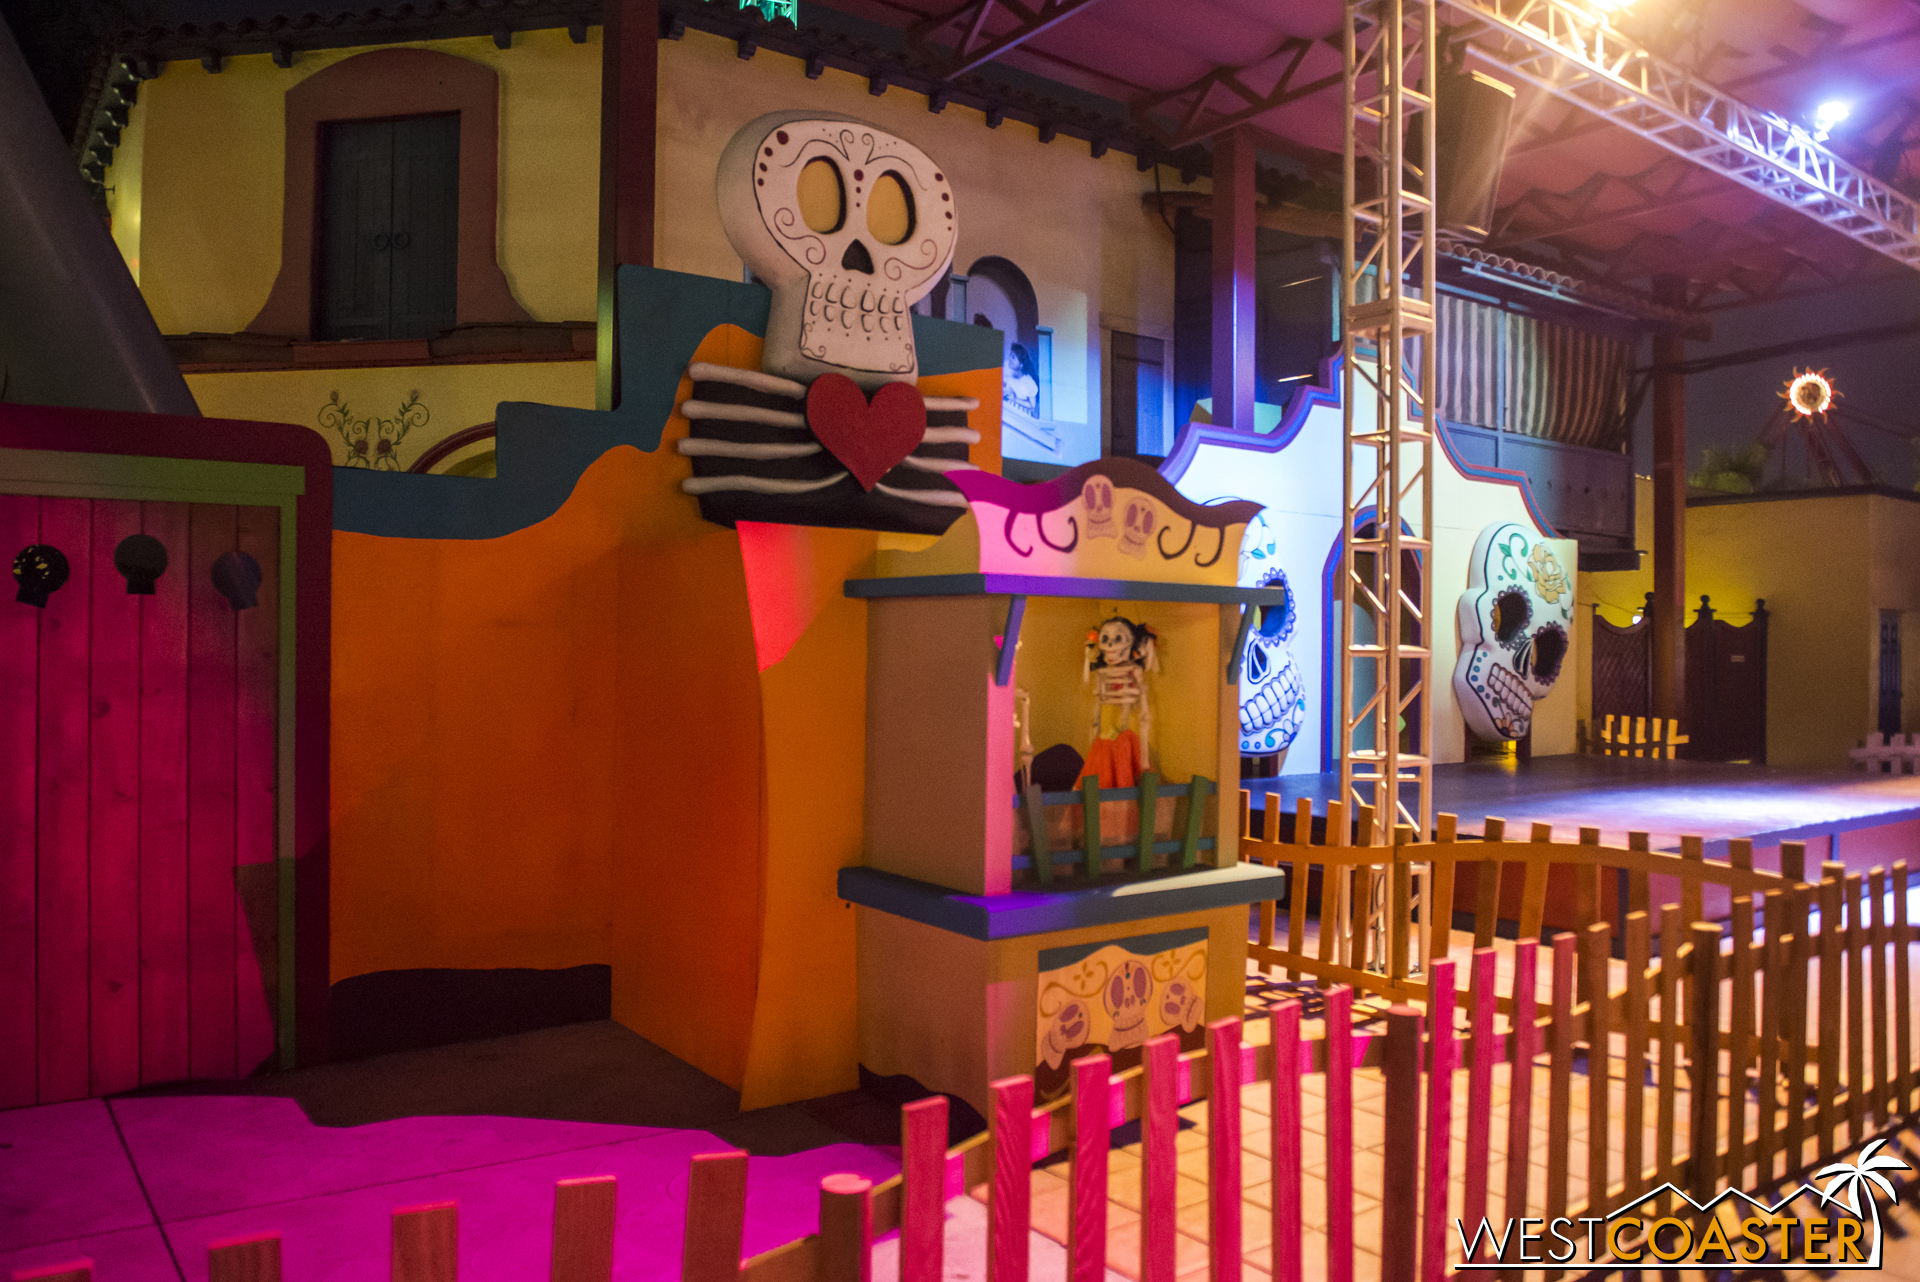  Fiesta de los Muertos also has a little diorama by the stage area, but no dance party (thank goodness). 